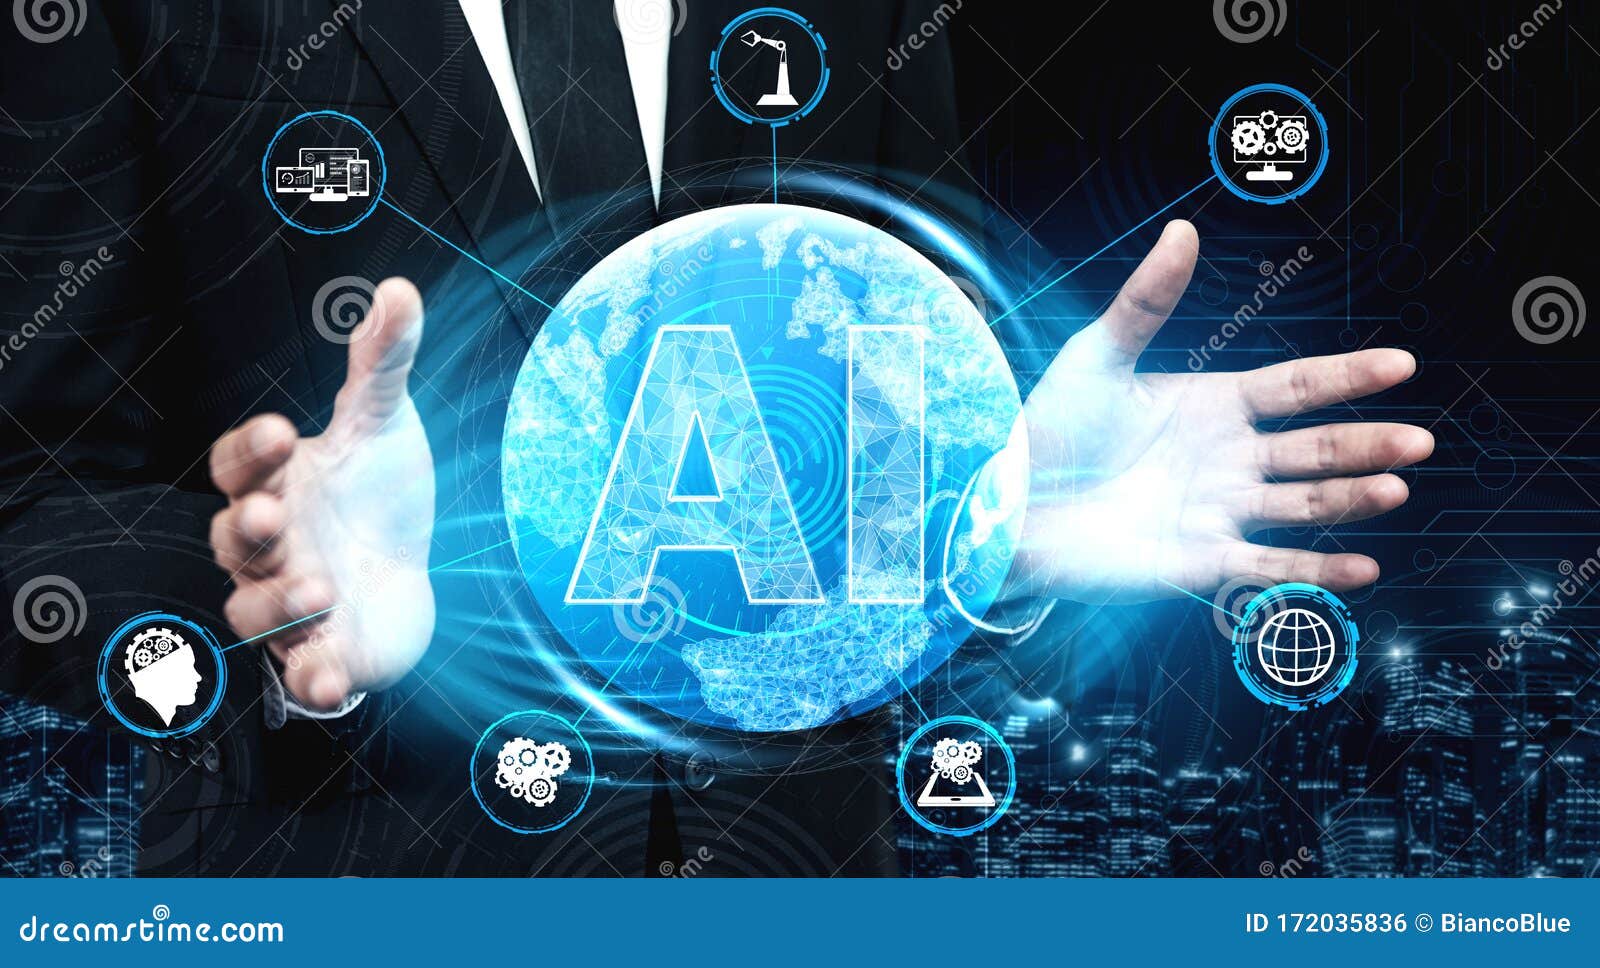 ai learning and artificial intelligence concept